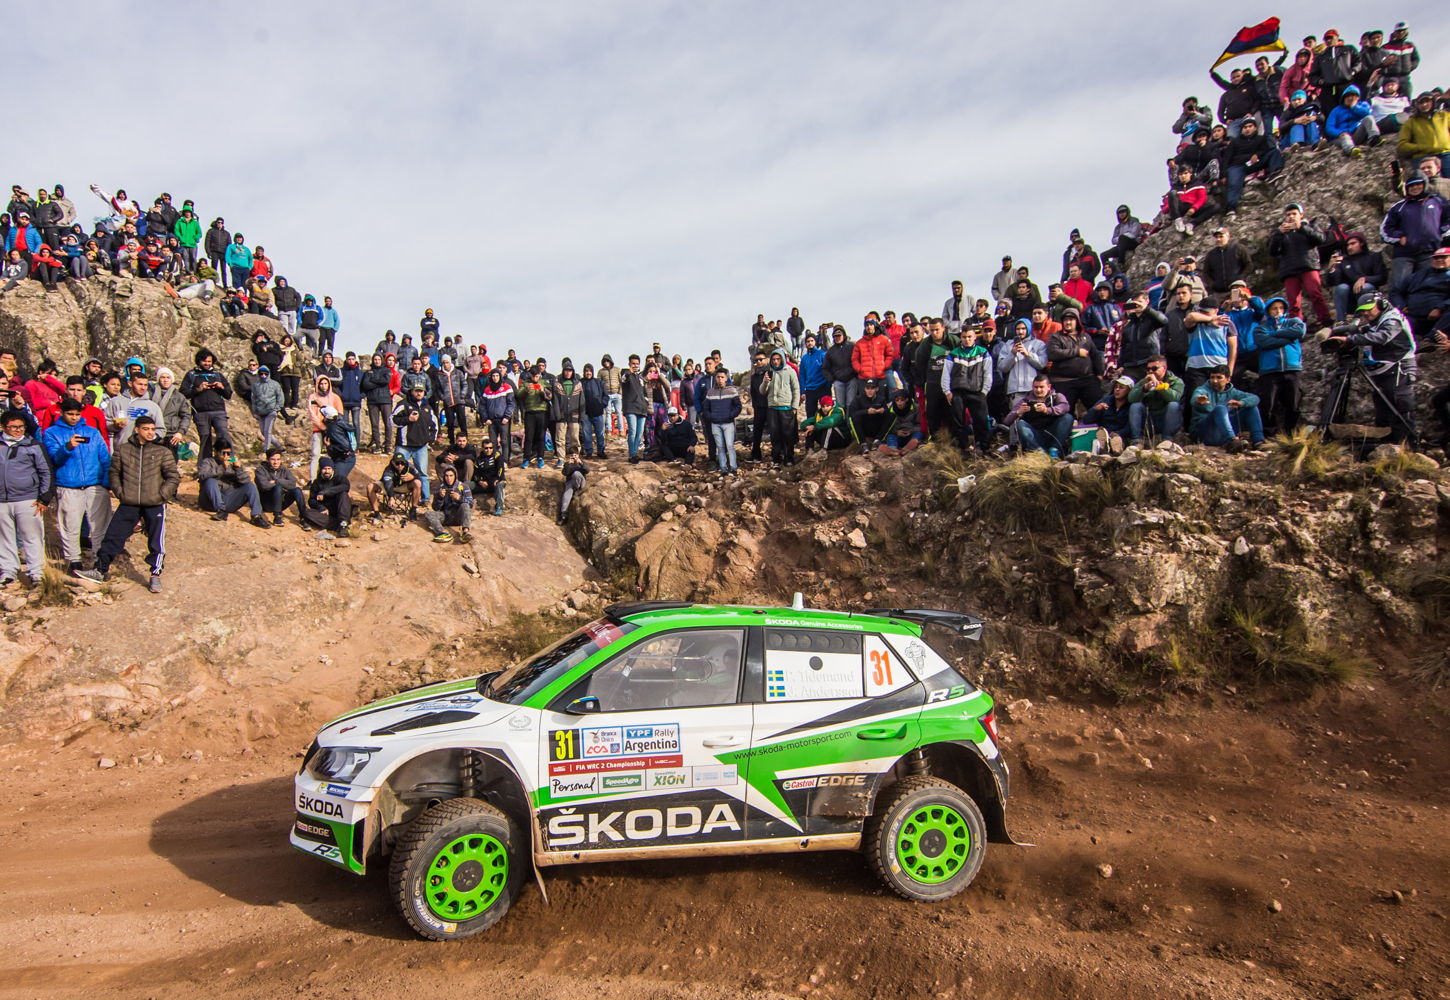 Reigning WRC 2 Champions Pontus Tidemand/Jonas
Andersson (SWE/SWE), driving a ŠKODA FABIA R5, want
to achieve a hat-trick win in the WRC 2 category.